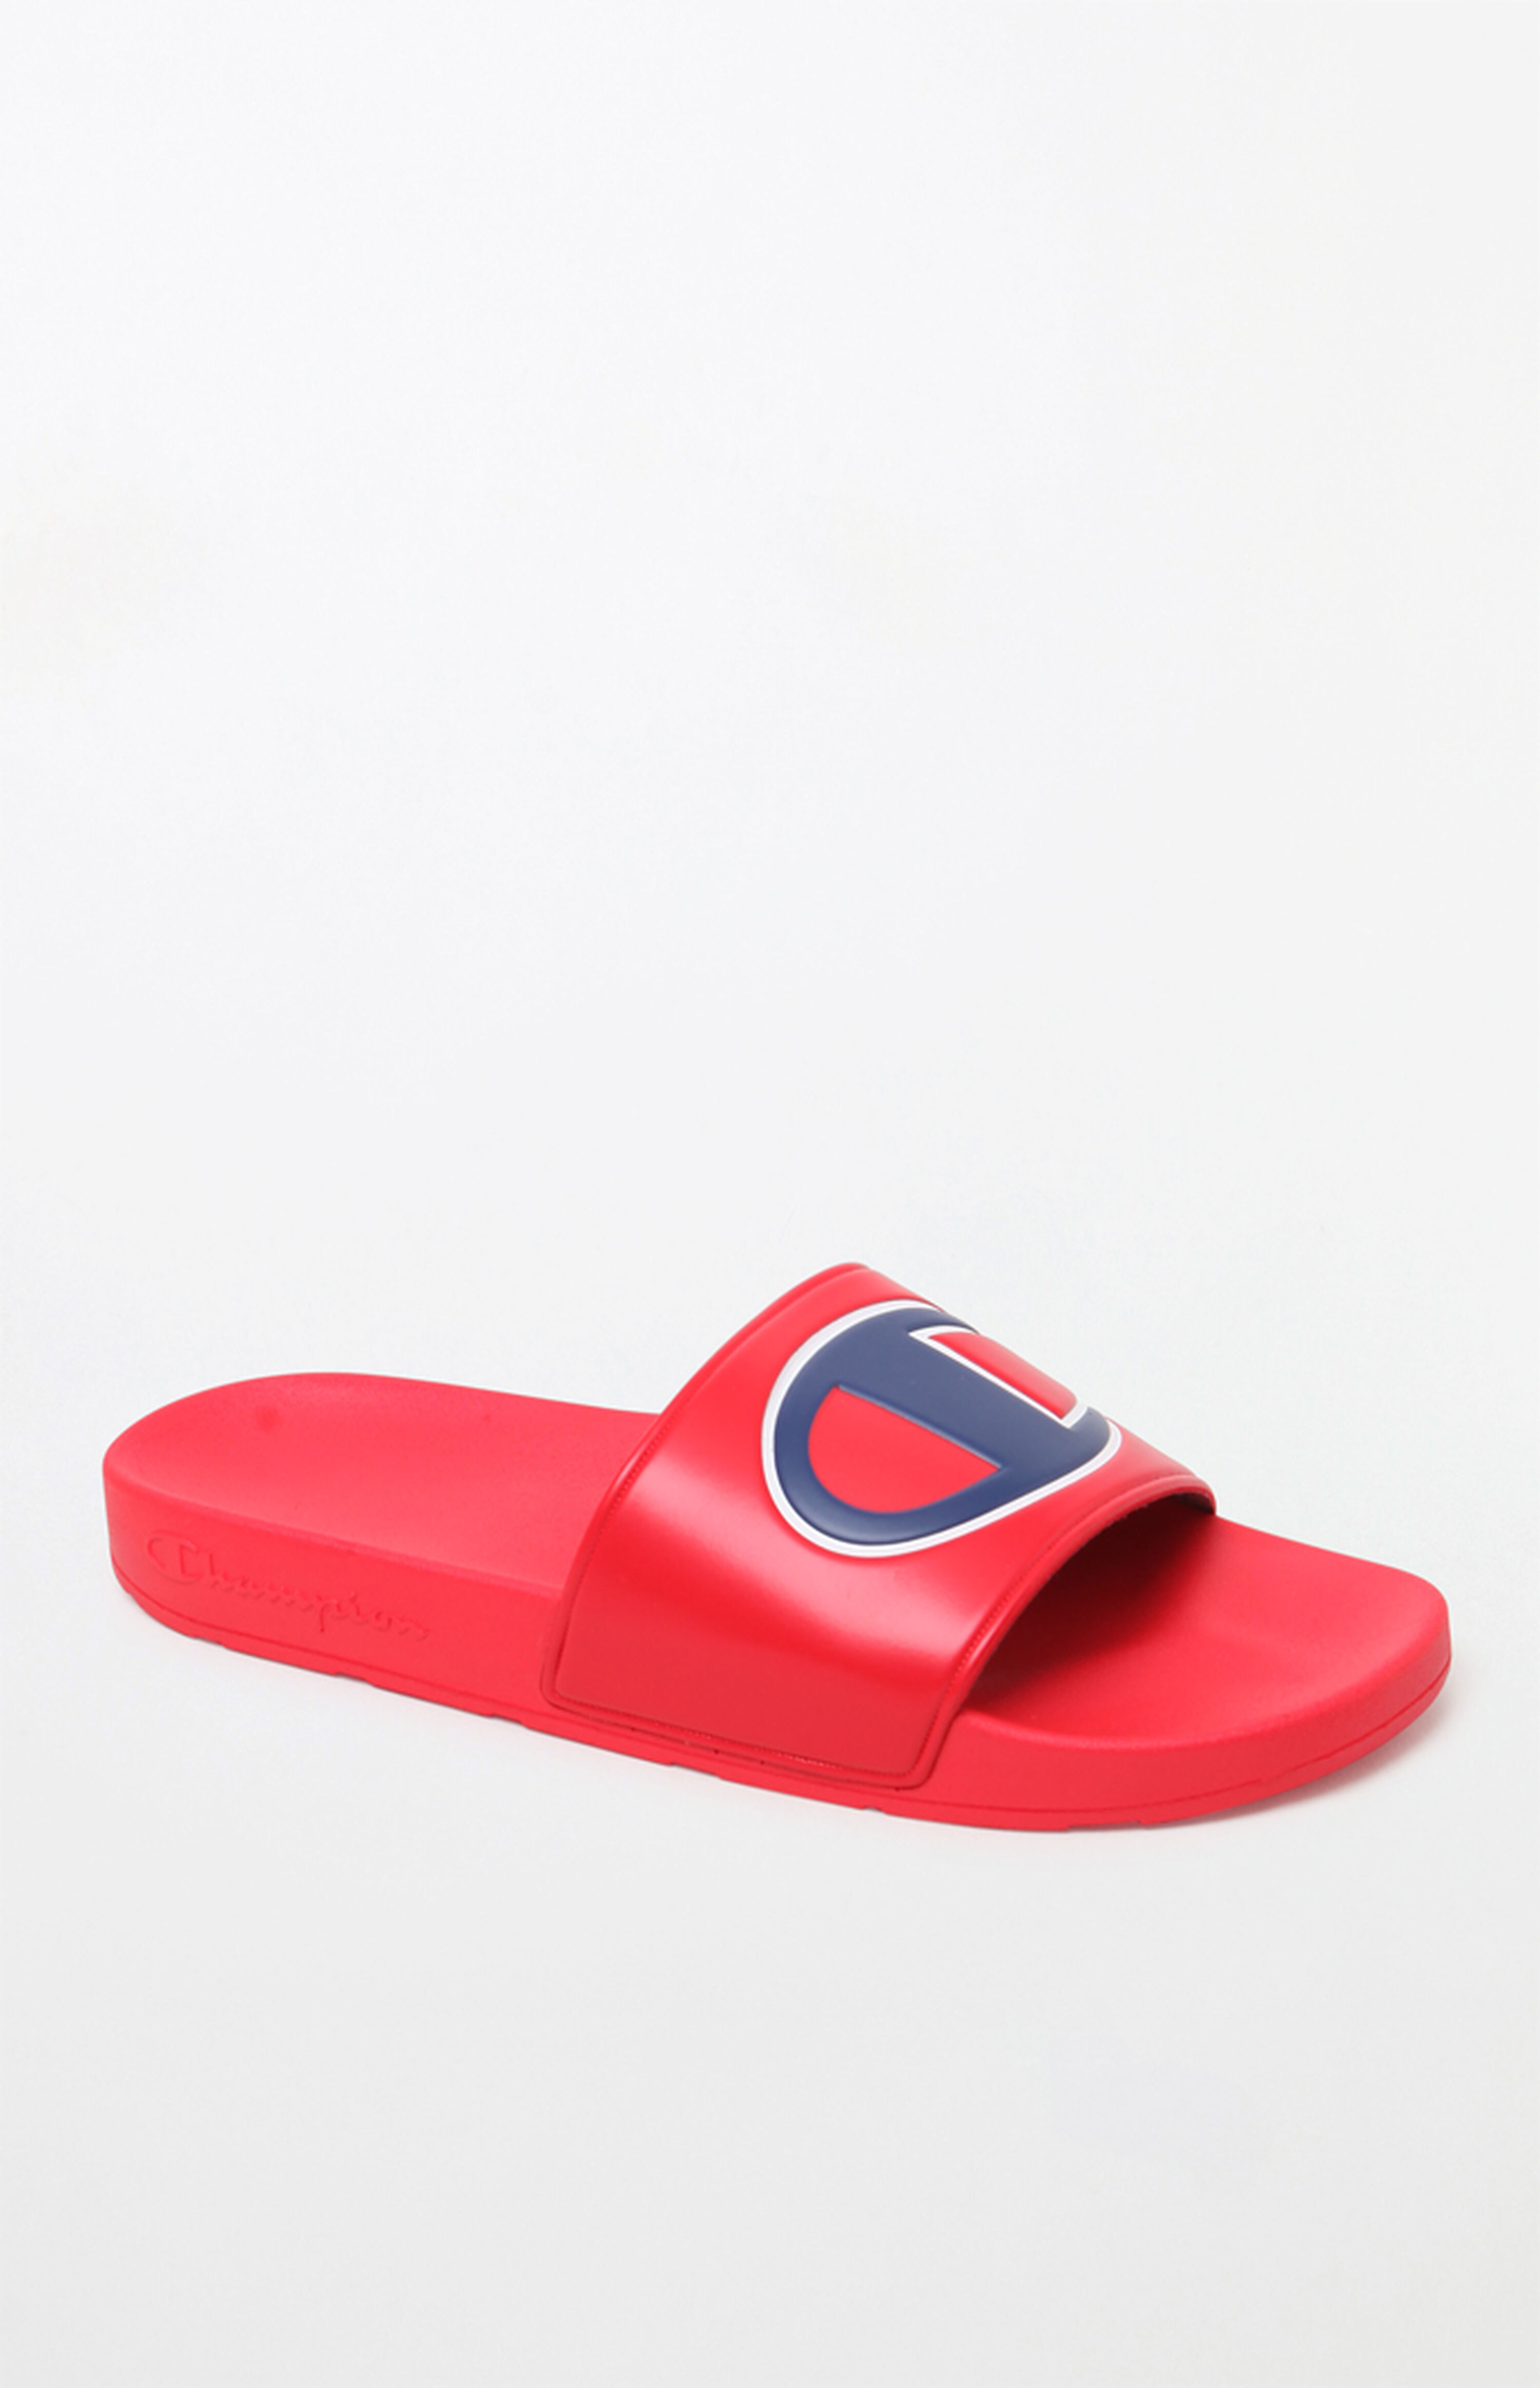 Champion Red IPO Slide Sandals | PacSun